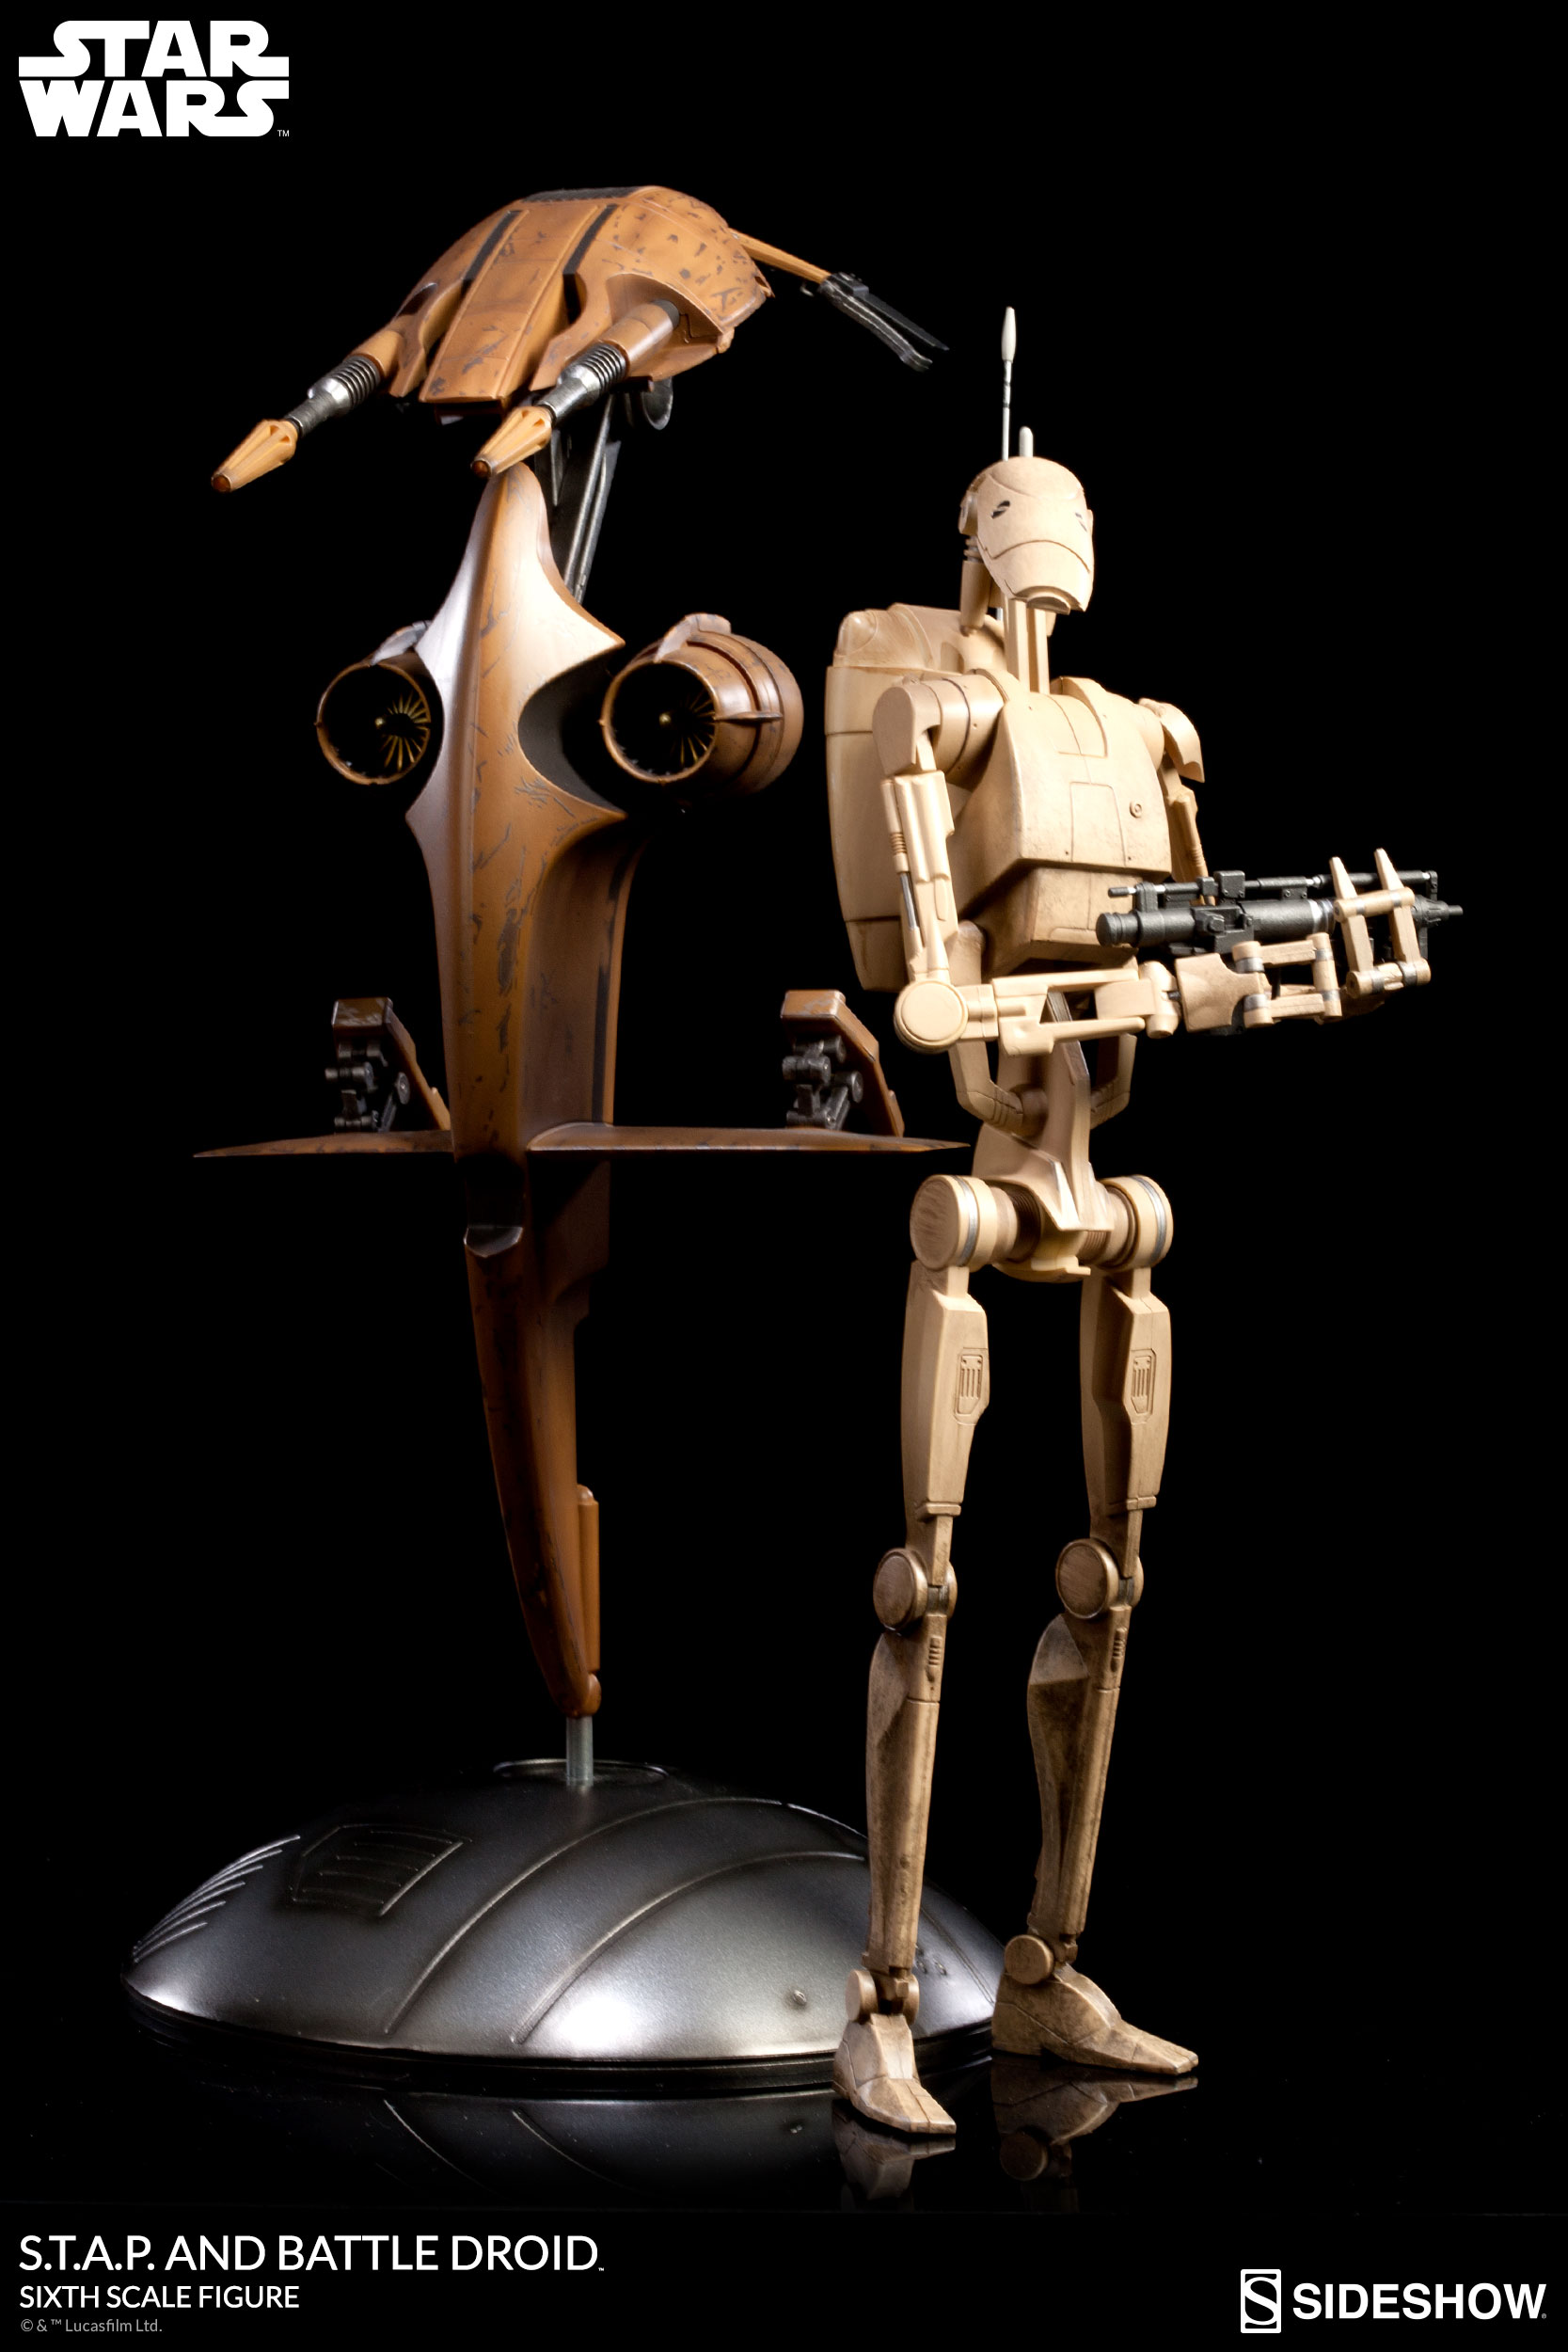 star wars stap and battle droid